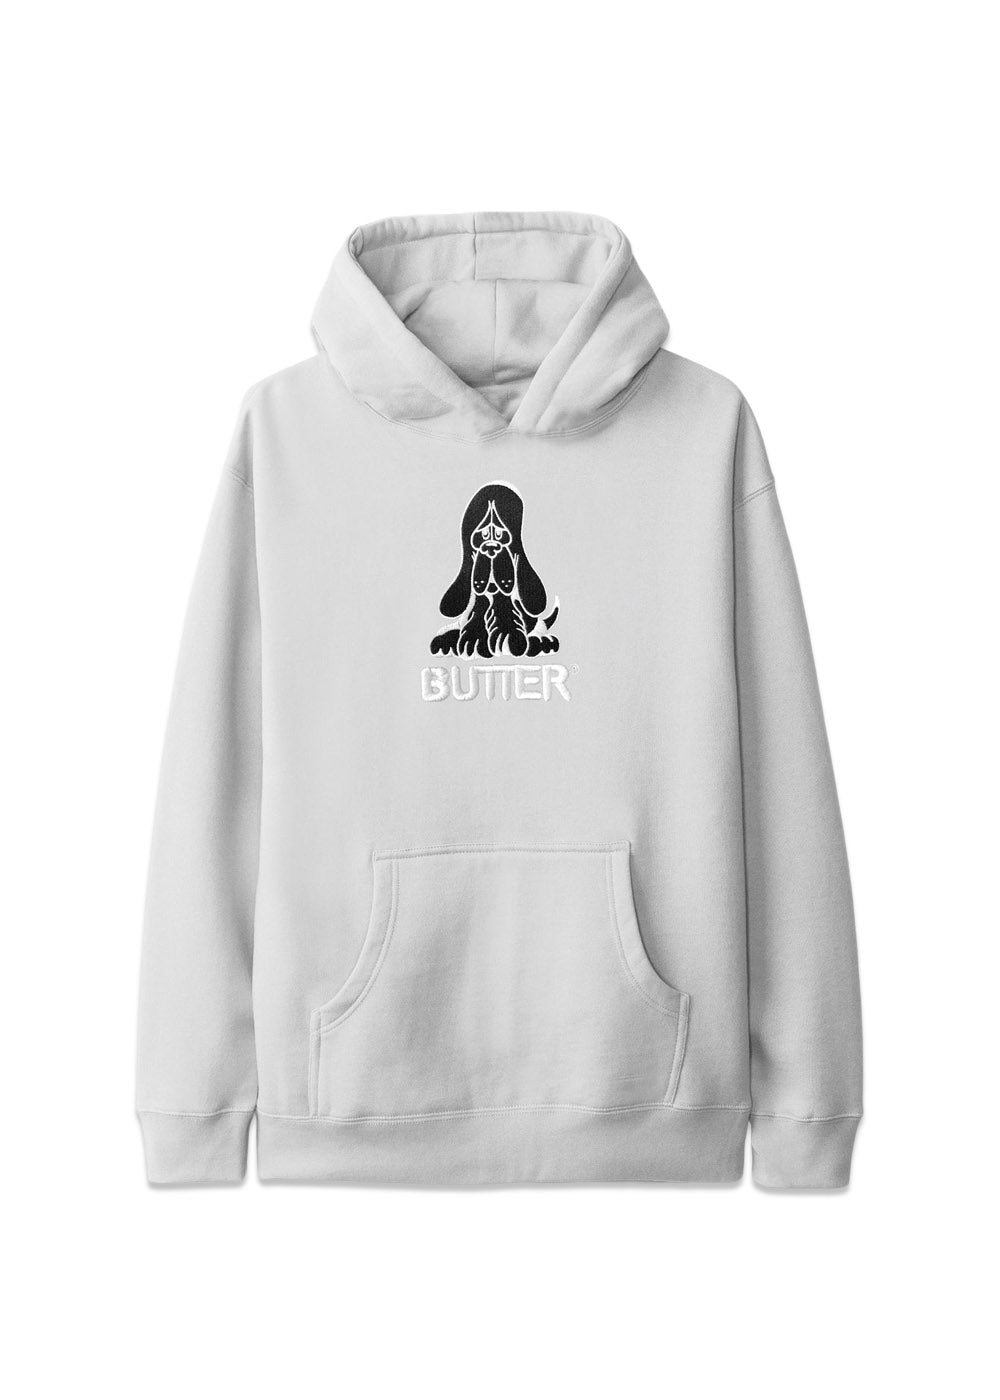 Hound embroidered pullover hood - Cement